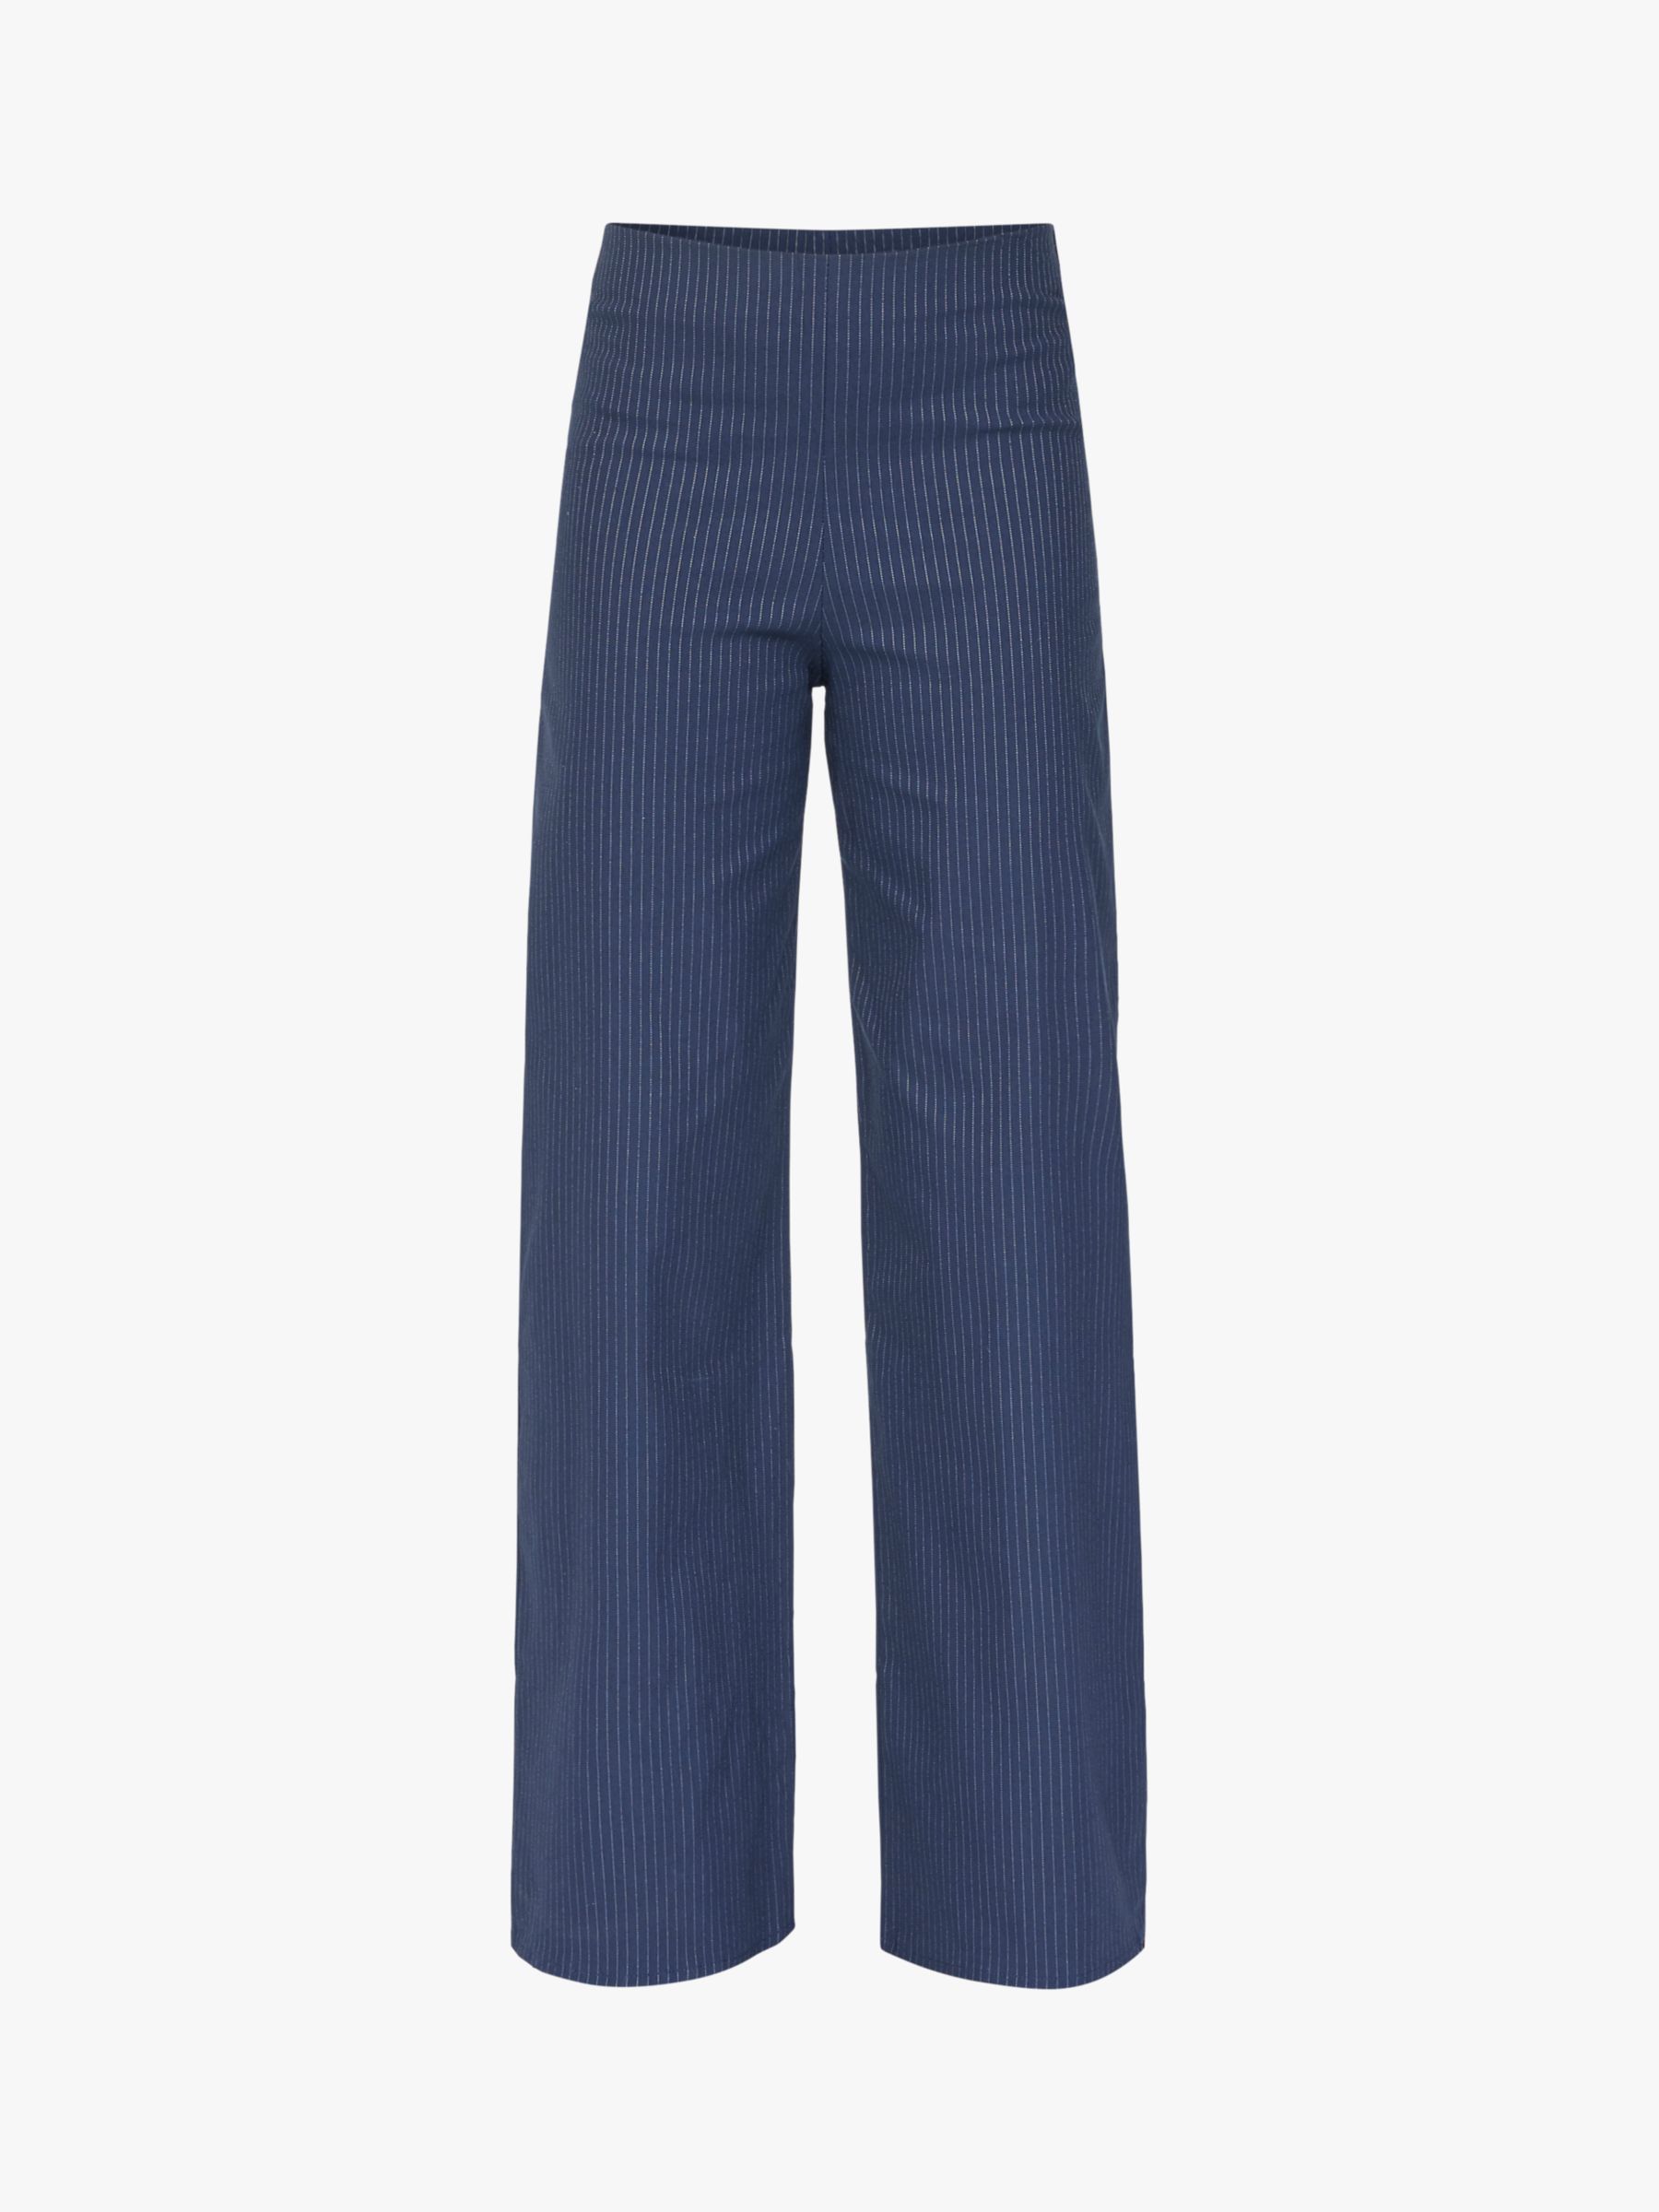 Buy Sisters Point Wide Leg Striped Trousers Online at johnlewis.com